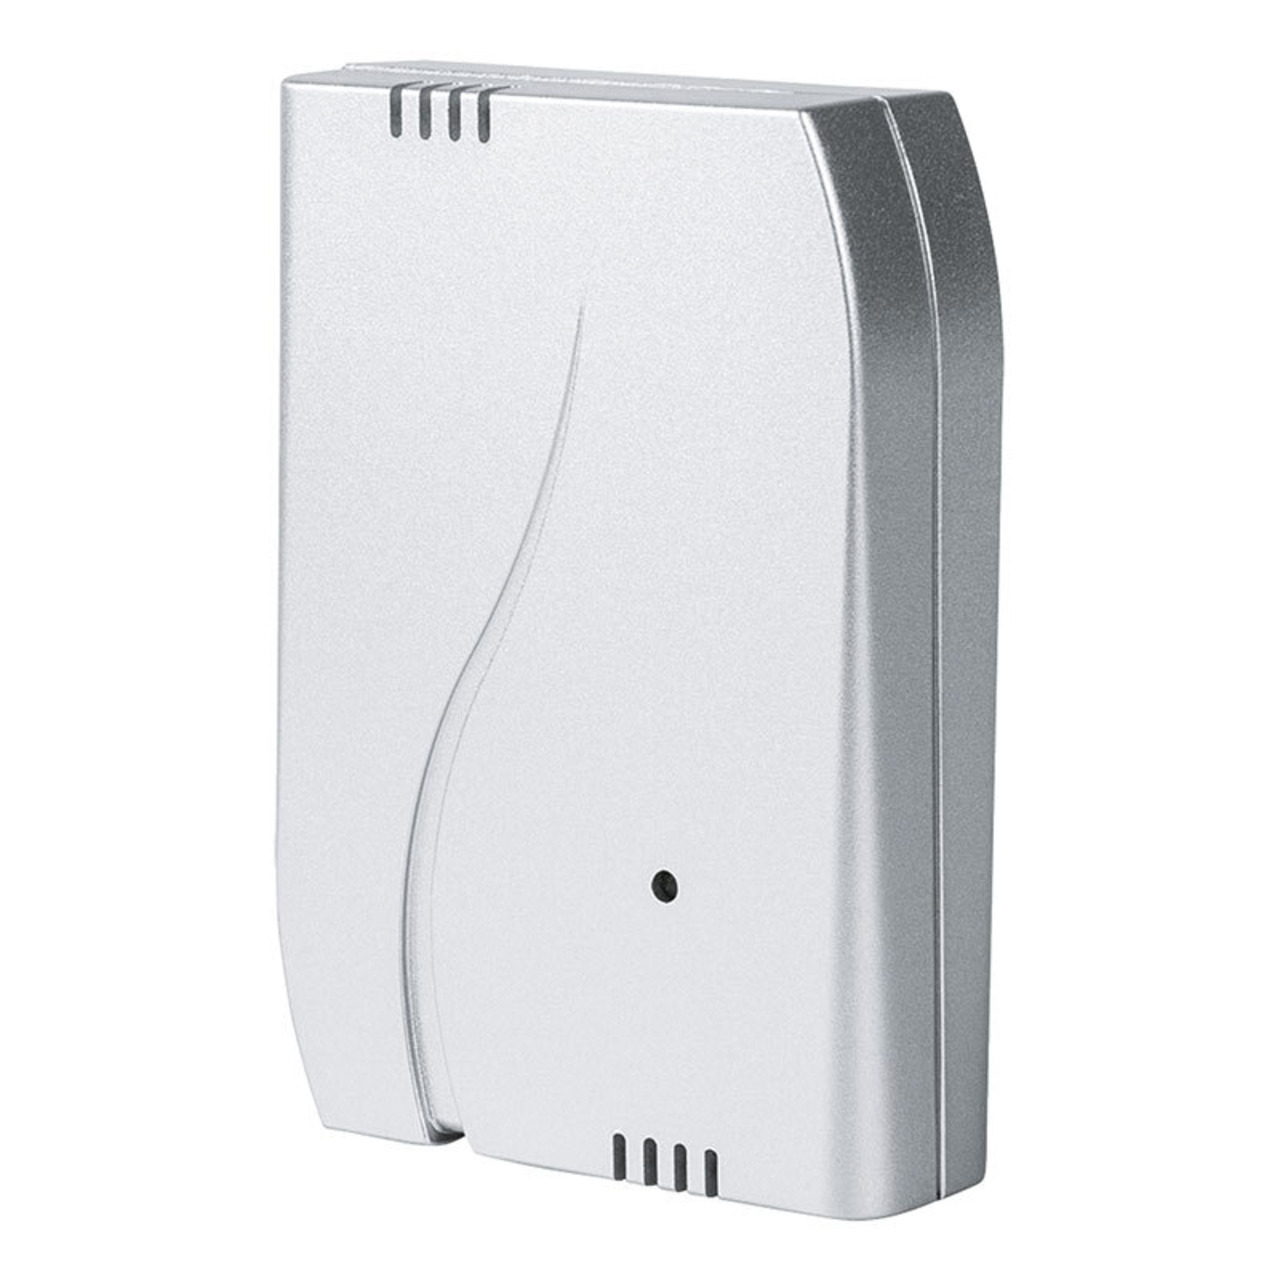 Homematic Funk-Innensensor ITH HM-WDS40-TH-I-2 fr Smart Home - Hausautomation